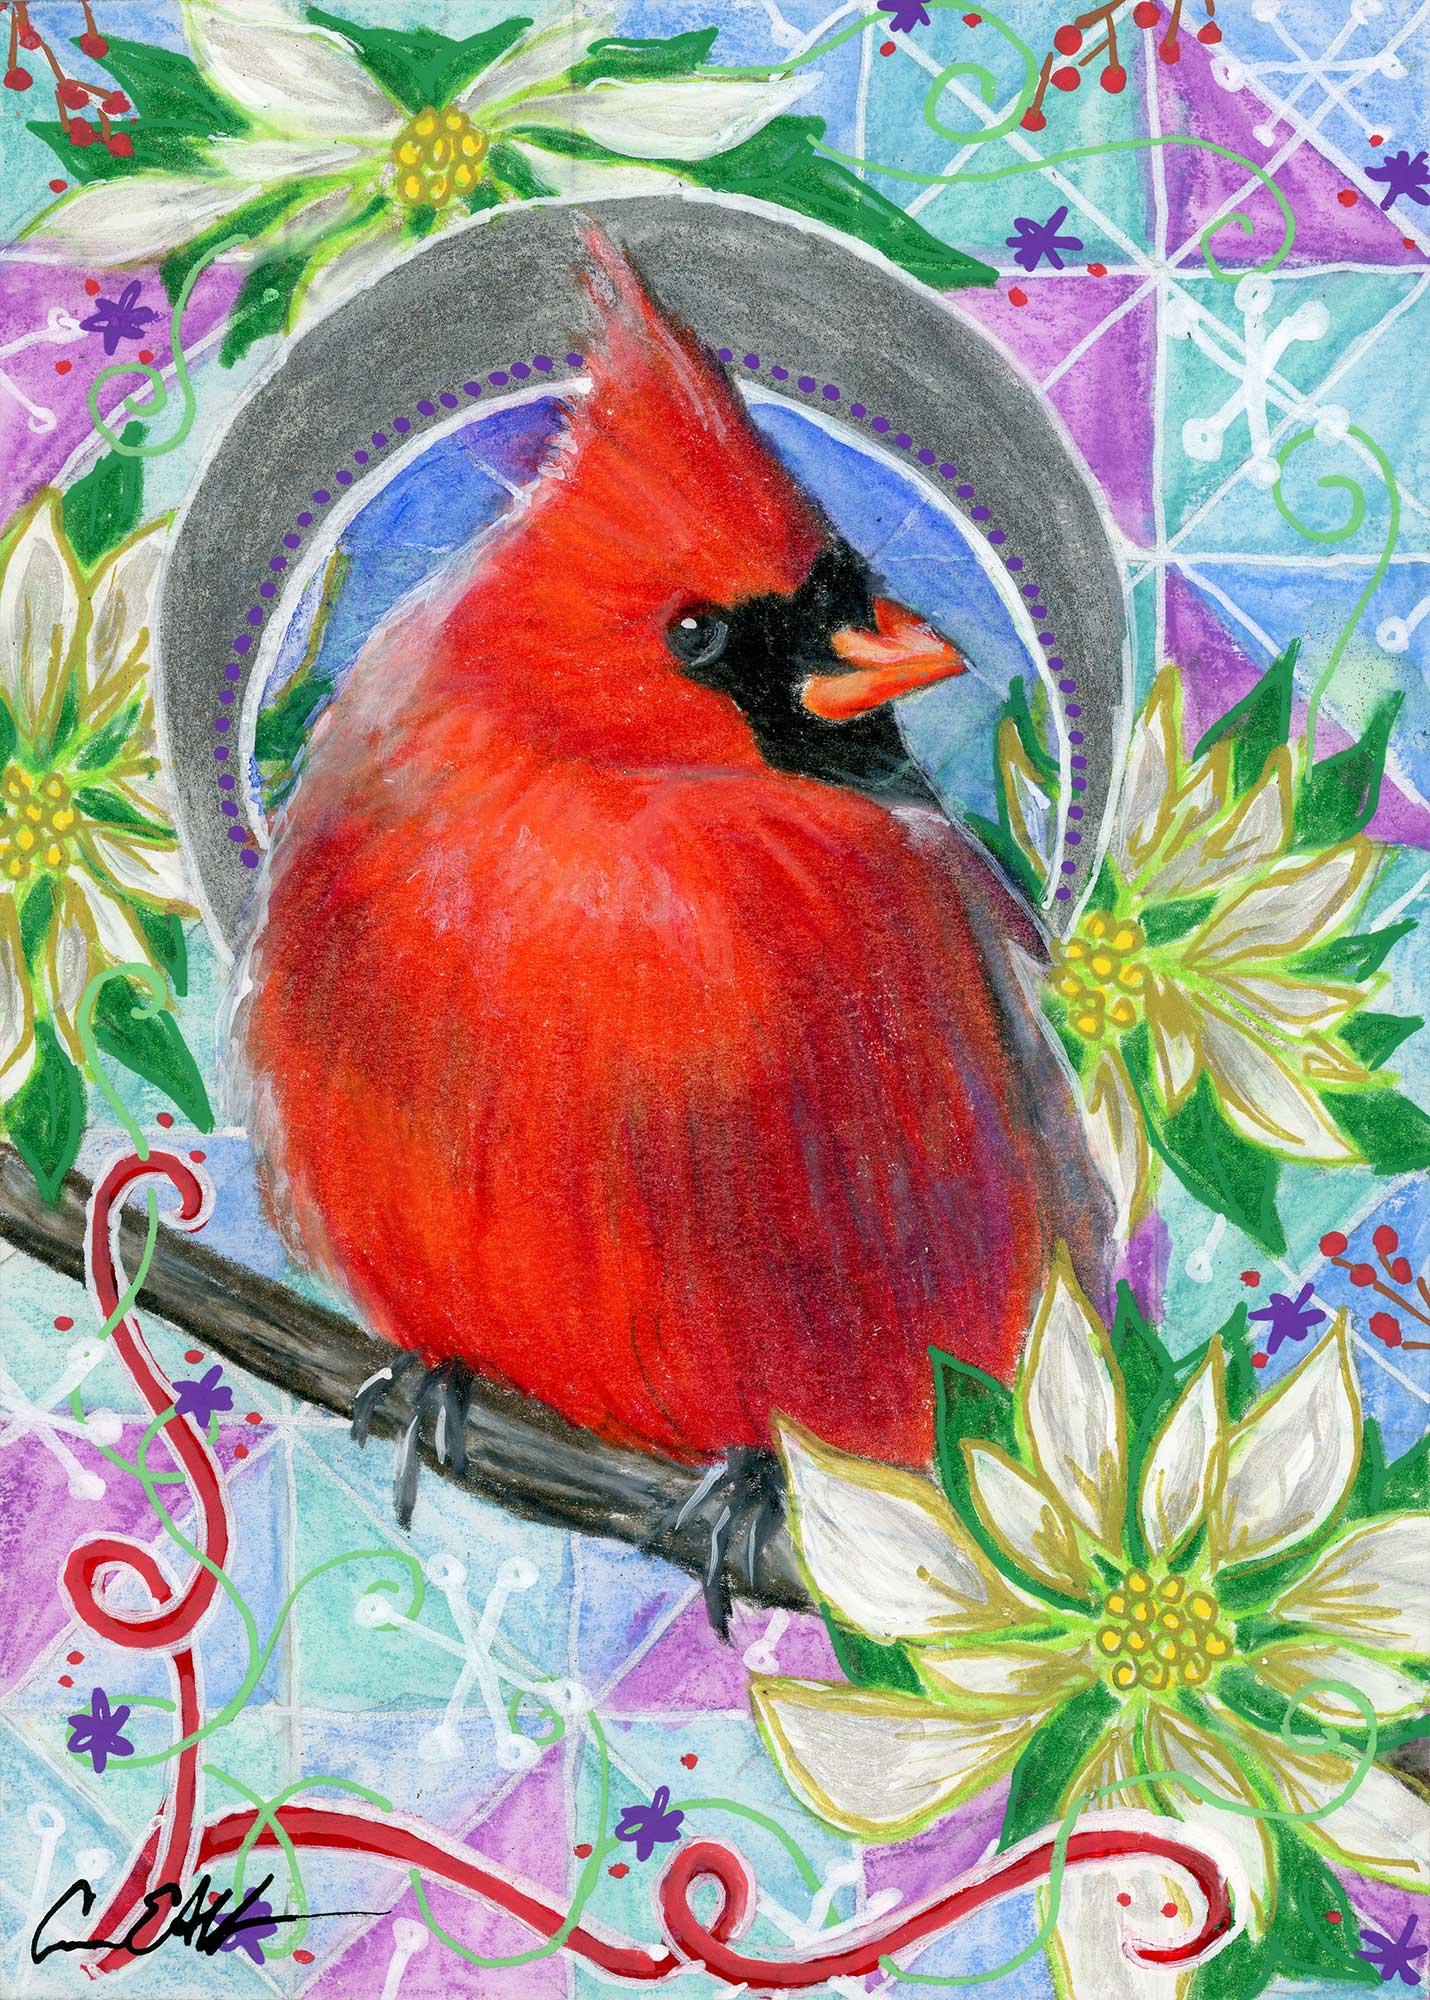 SOLD - "Cardinal in White Poinsettias", 5" x 7", mixed media